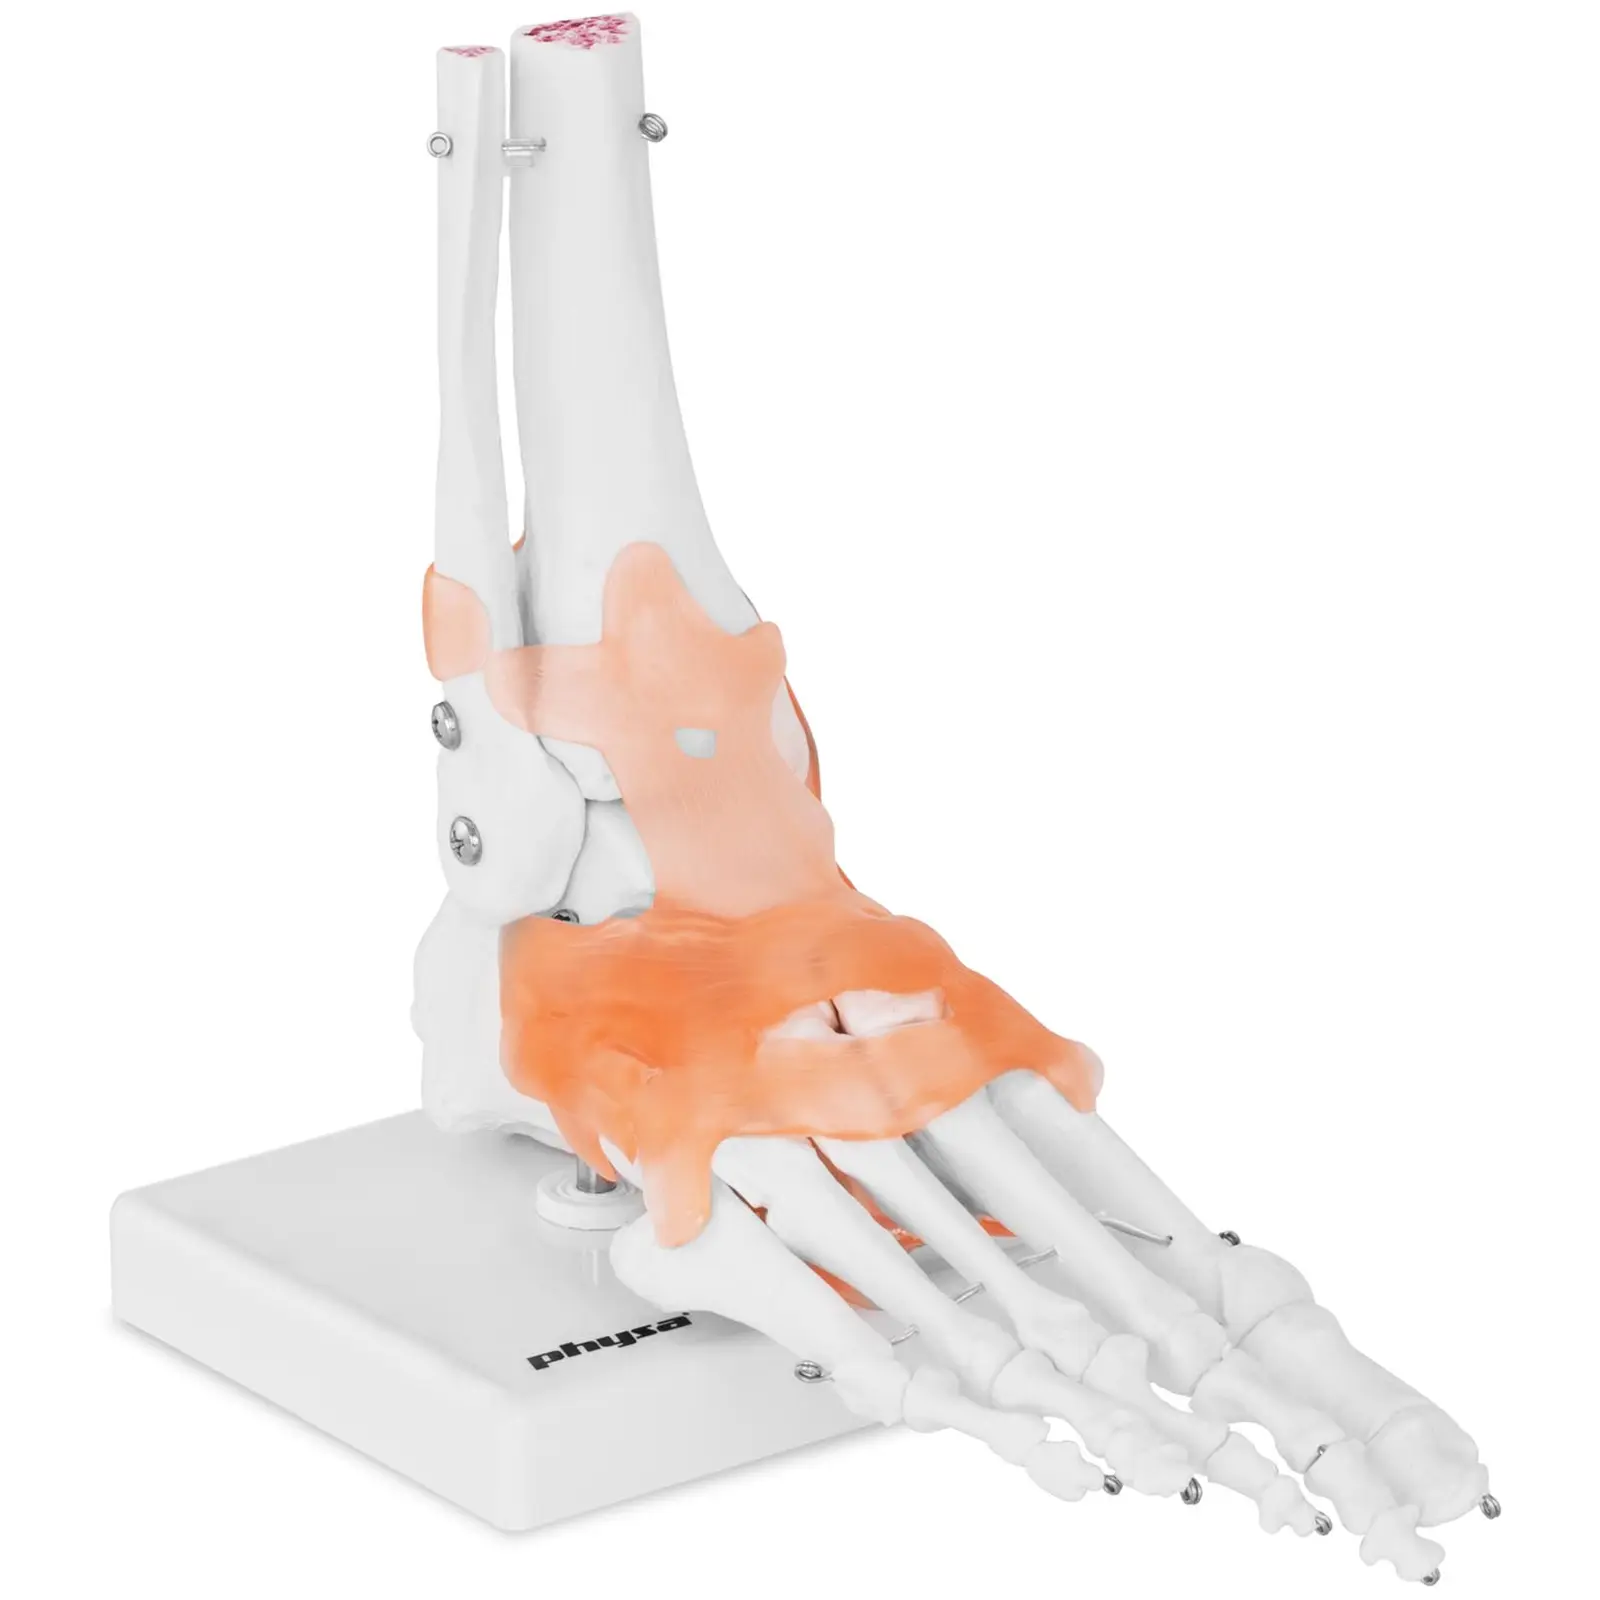 Foot Skeleton Model - with Ligaments and Joints